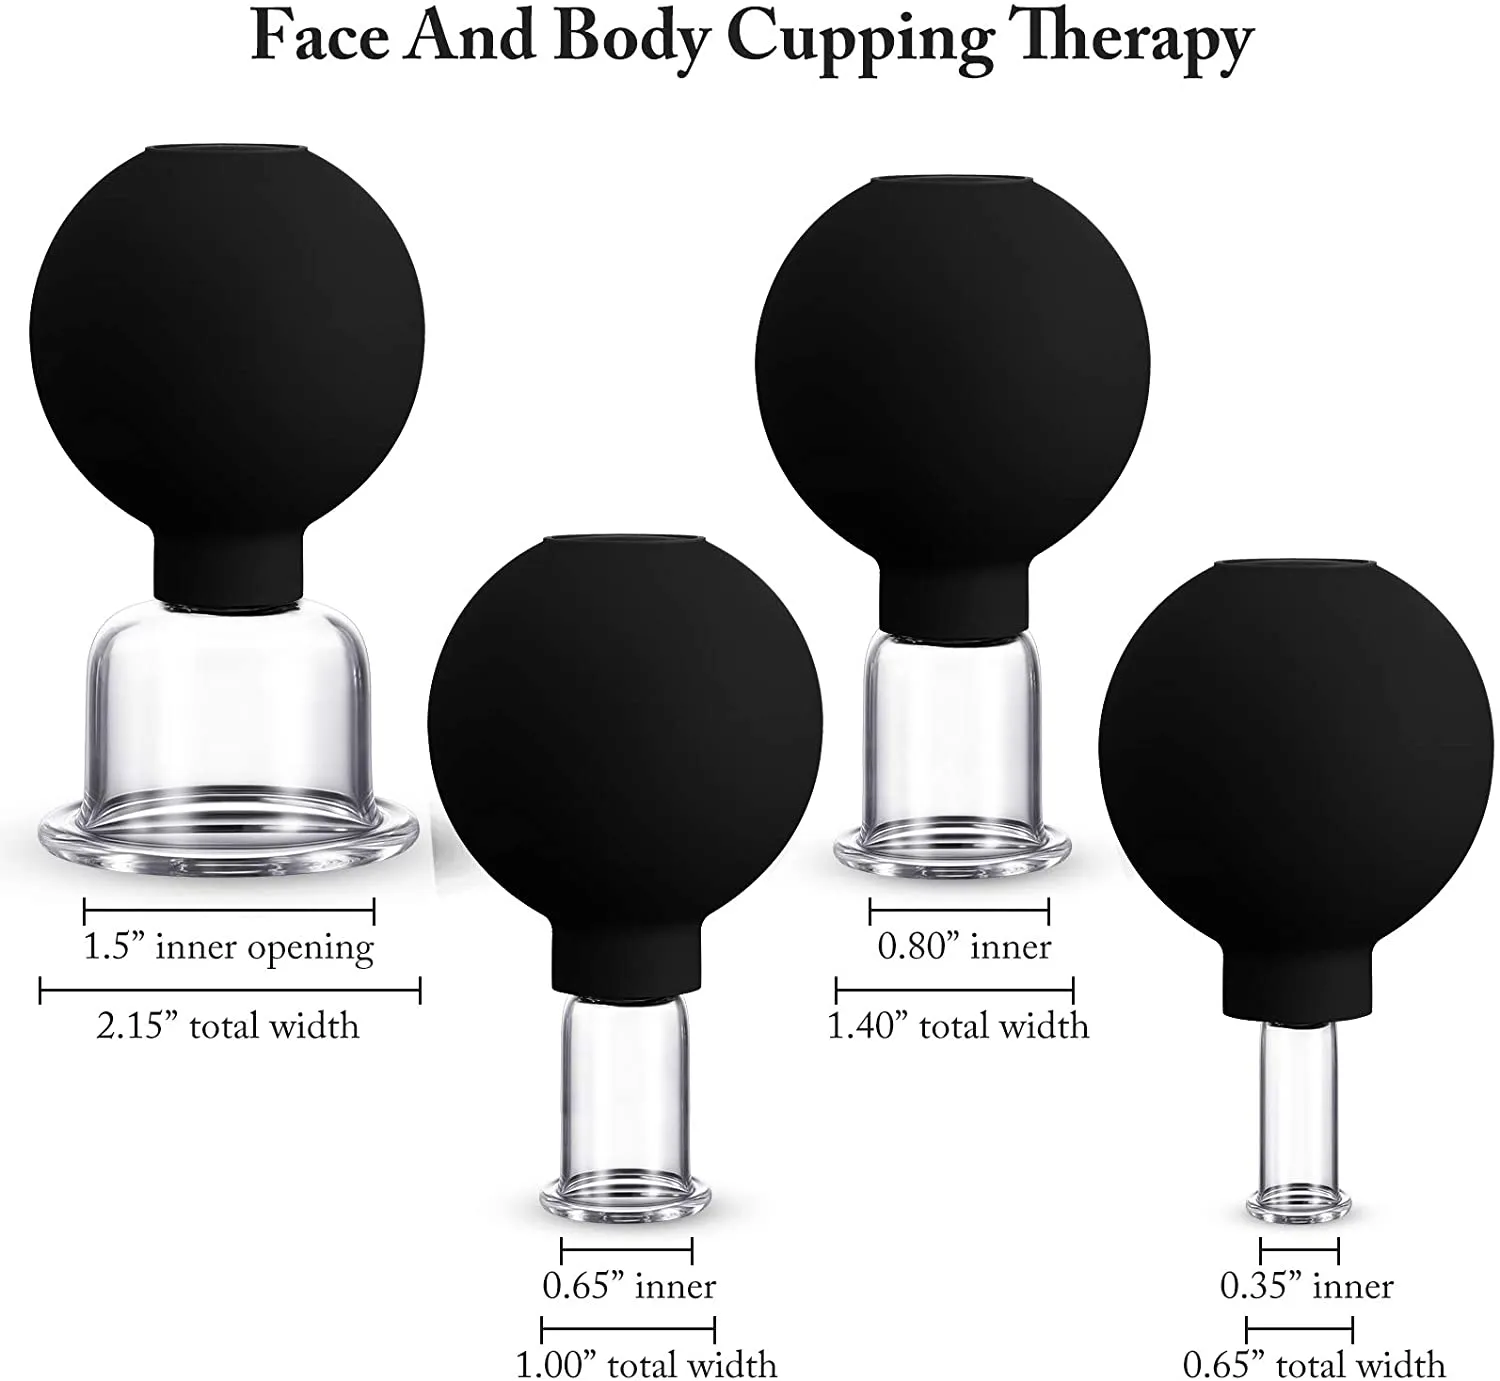 Glass Facial Massage Cupping Therapy Set Forth With Silicone Vacuum Suction  Cuppings For Anti Cellulite, Wrinkle Treatment In Eyes, Face, And Body From  Albercrystal01, $4.47